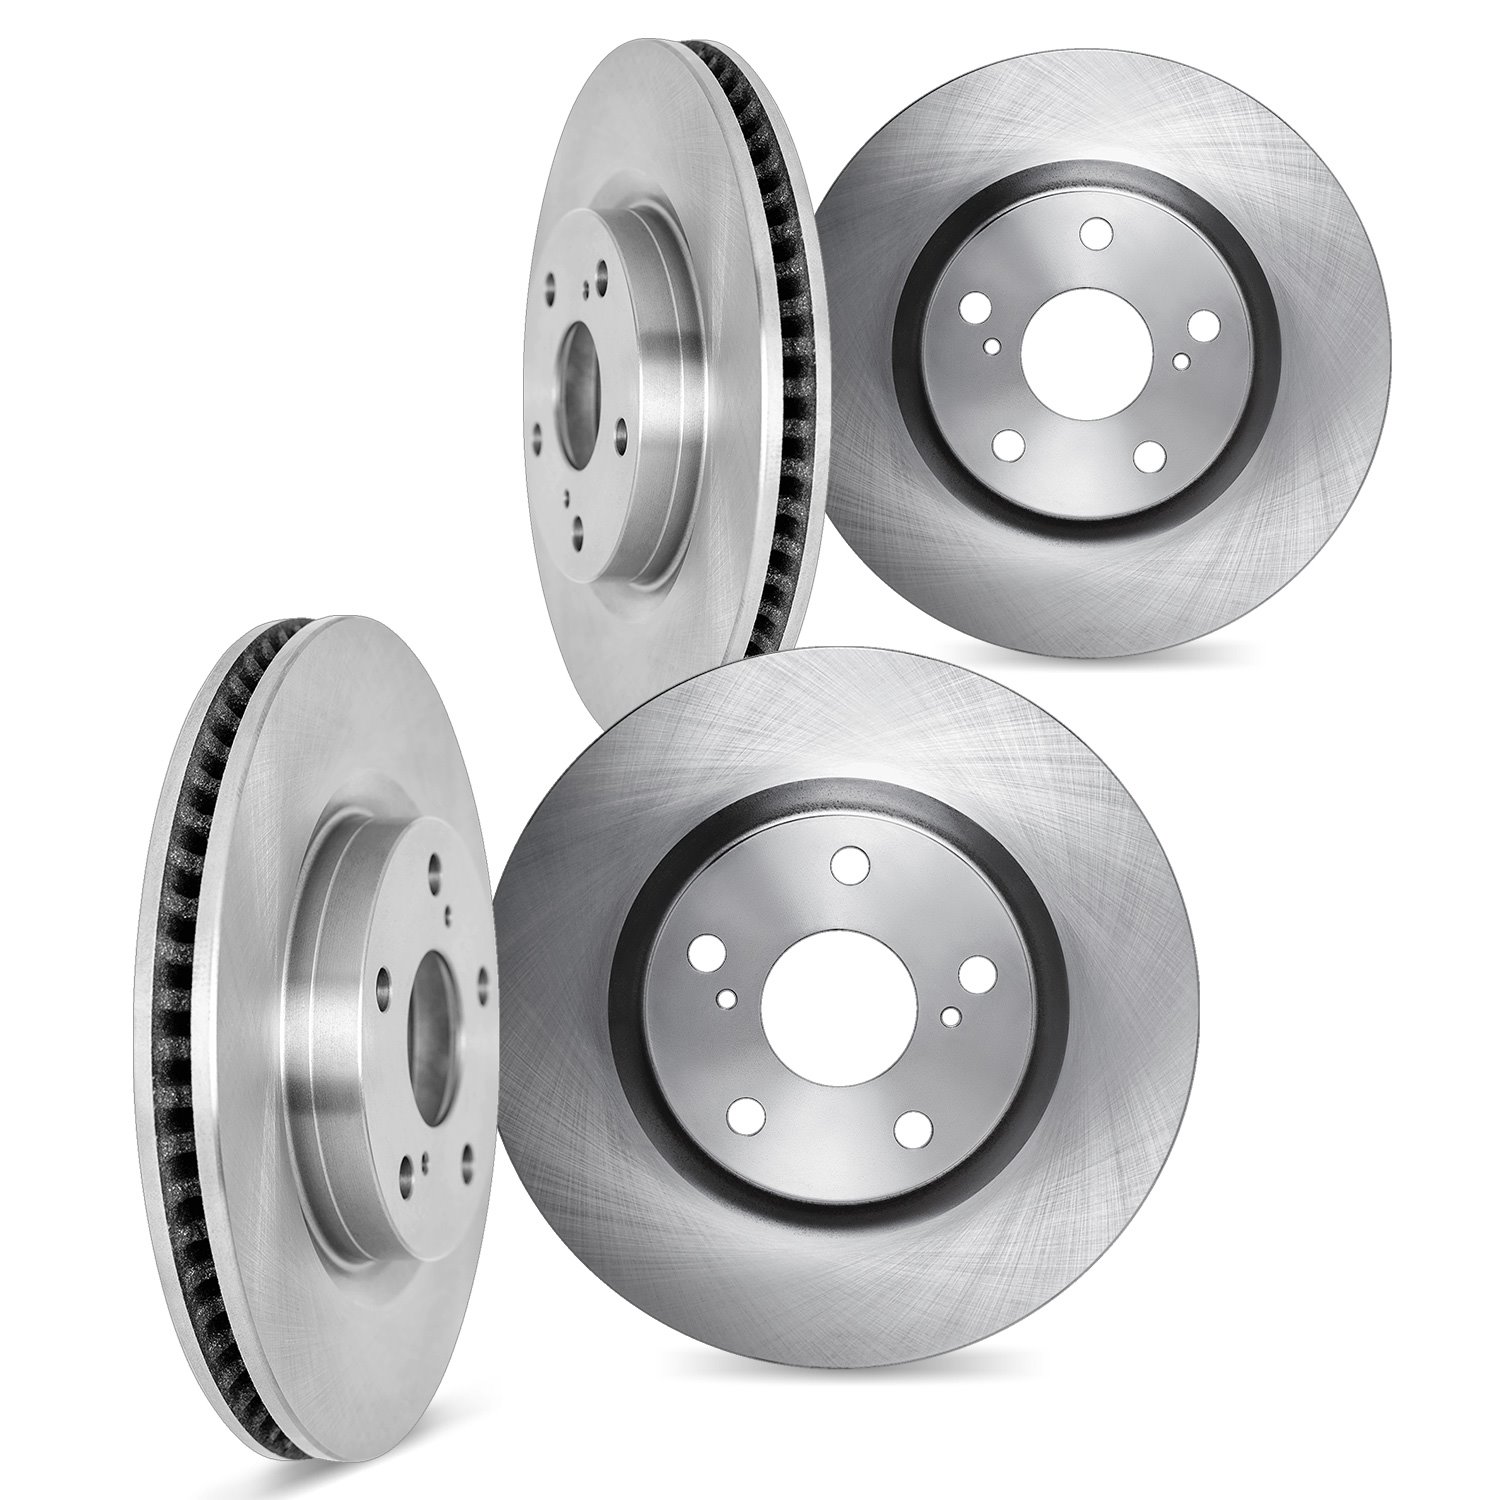 6004-73060 Brake Rotors, Fits Select Audi/Volkswagen, Position: Front and Rear